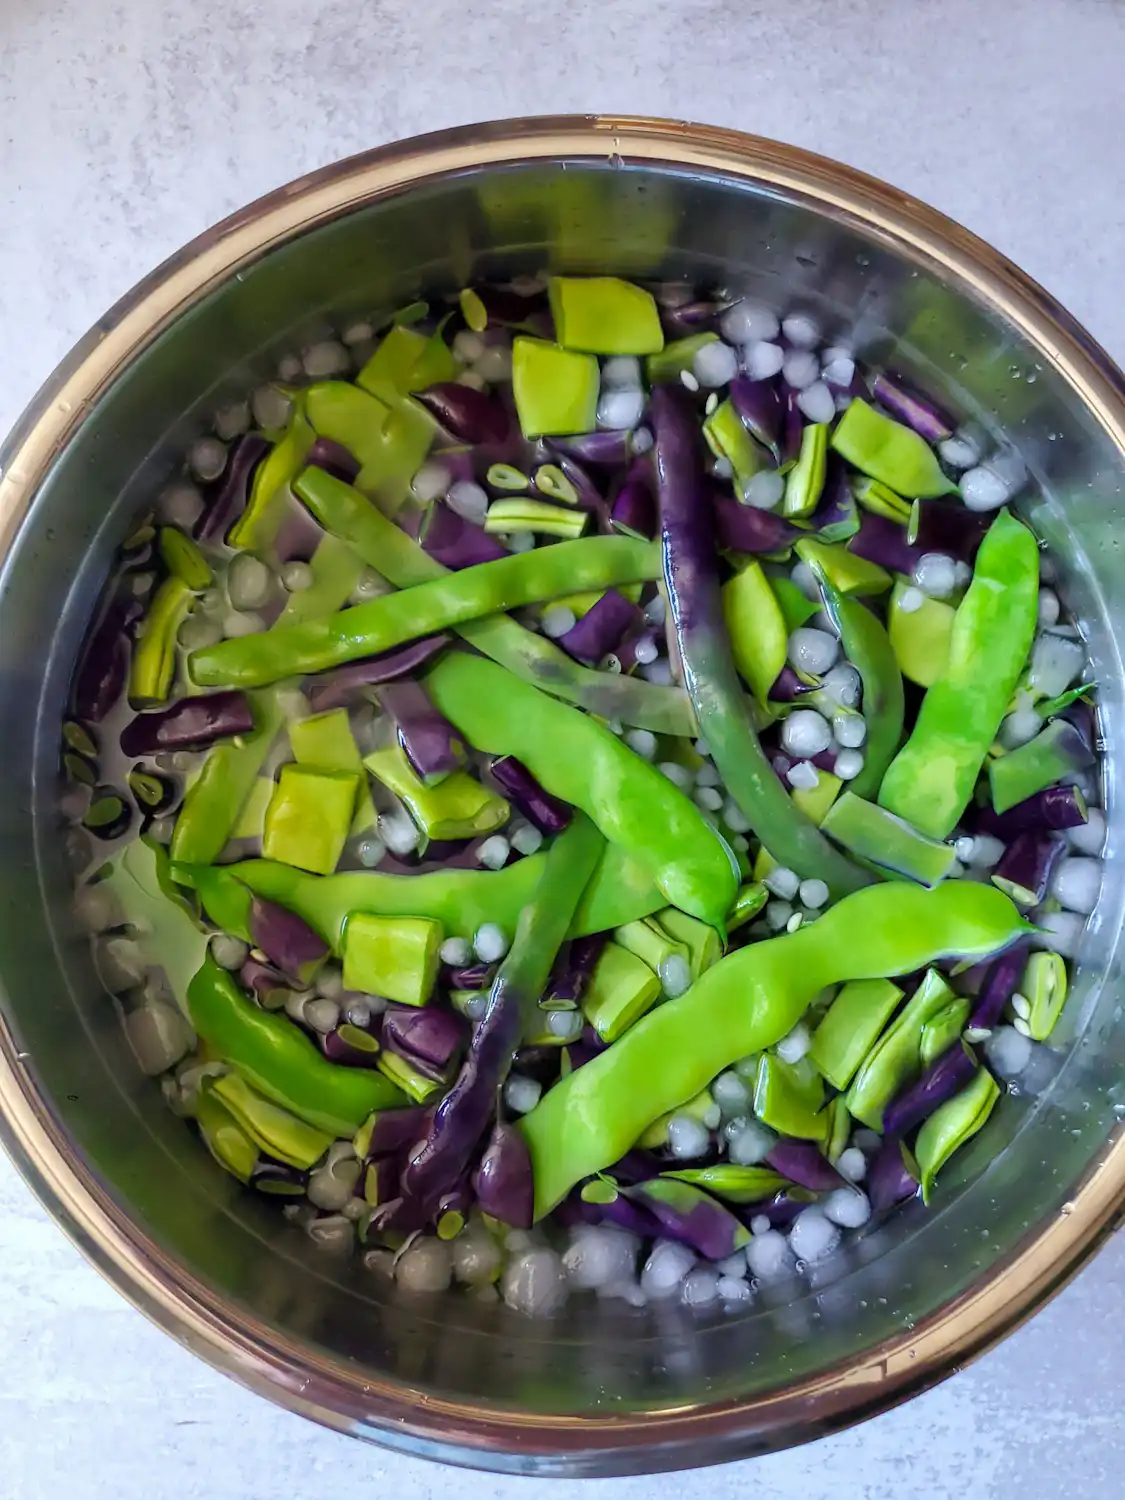 A stainless steel bowl full of ice, water, and some cut and whole green beans that will be stored in the freezer once finished processing. 